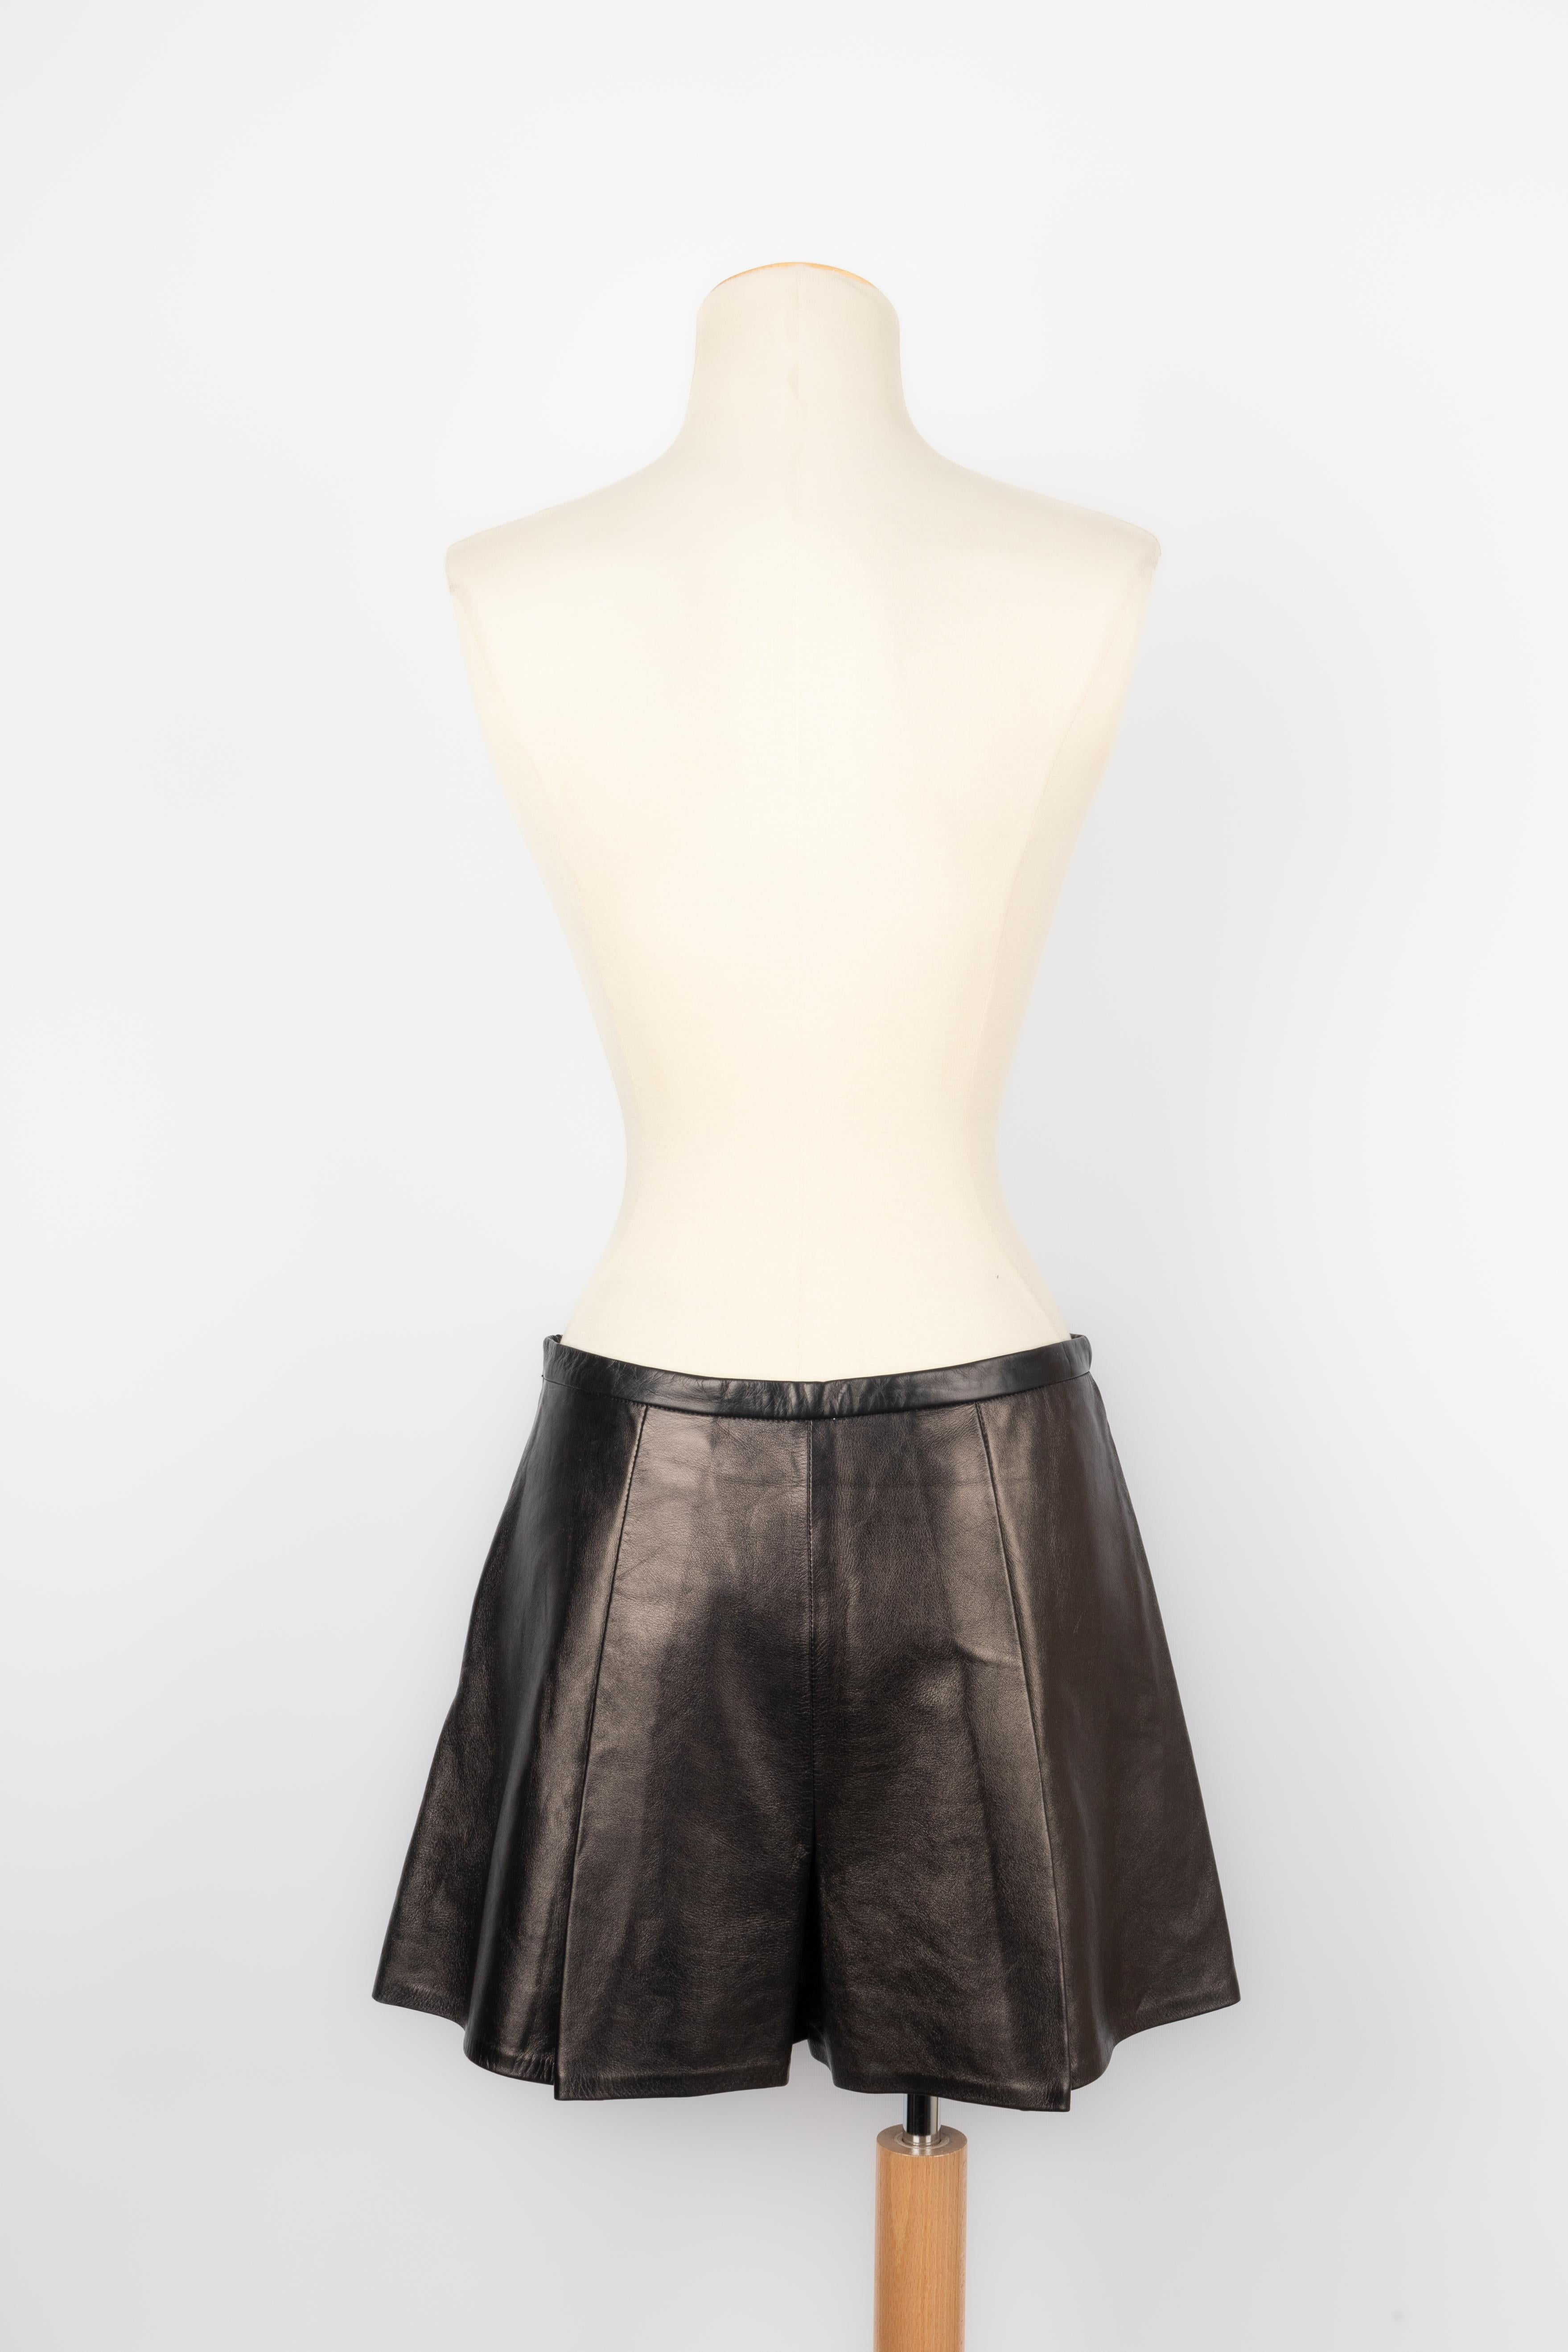 Pucci leather shorts For Sale 3